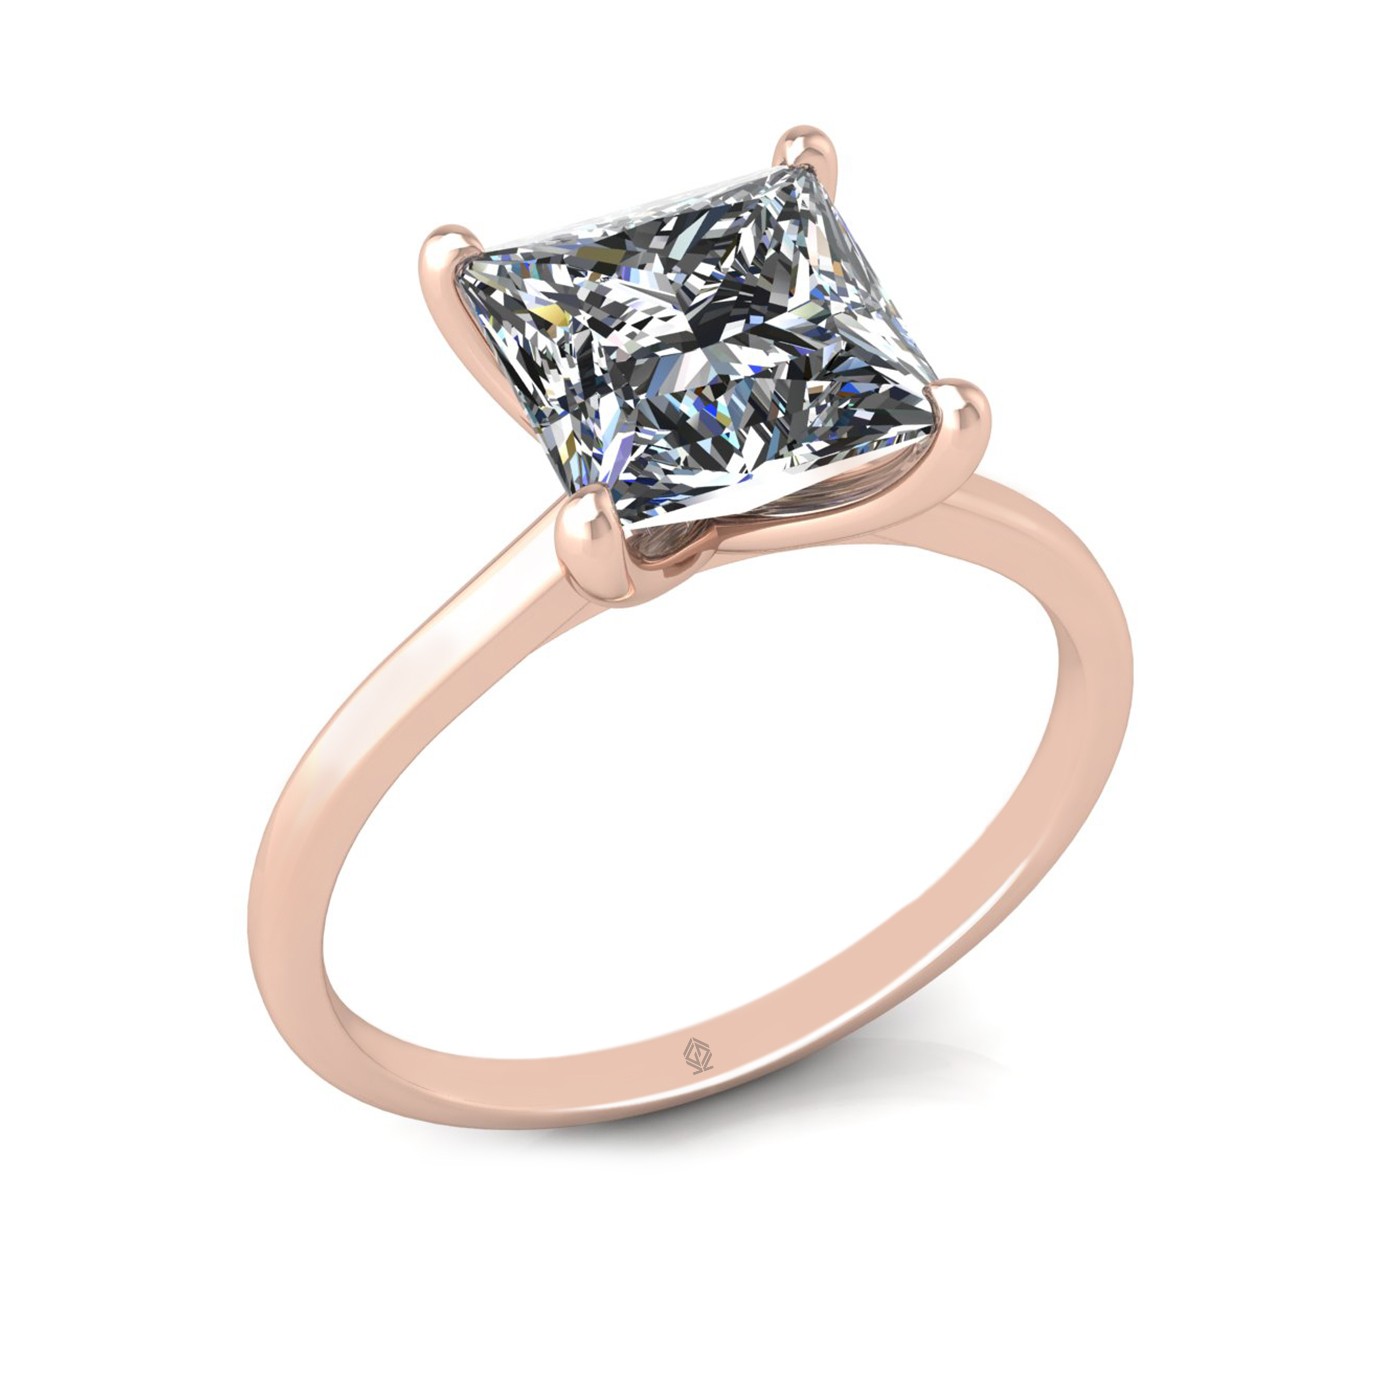 18k rose gold  2,50 ct 4 prongs solitaire princess cut diamond engagement ring with whisper thin band